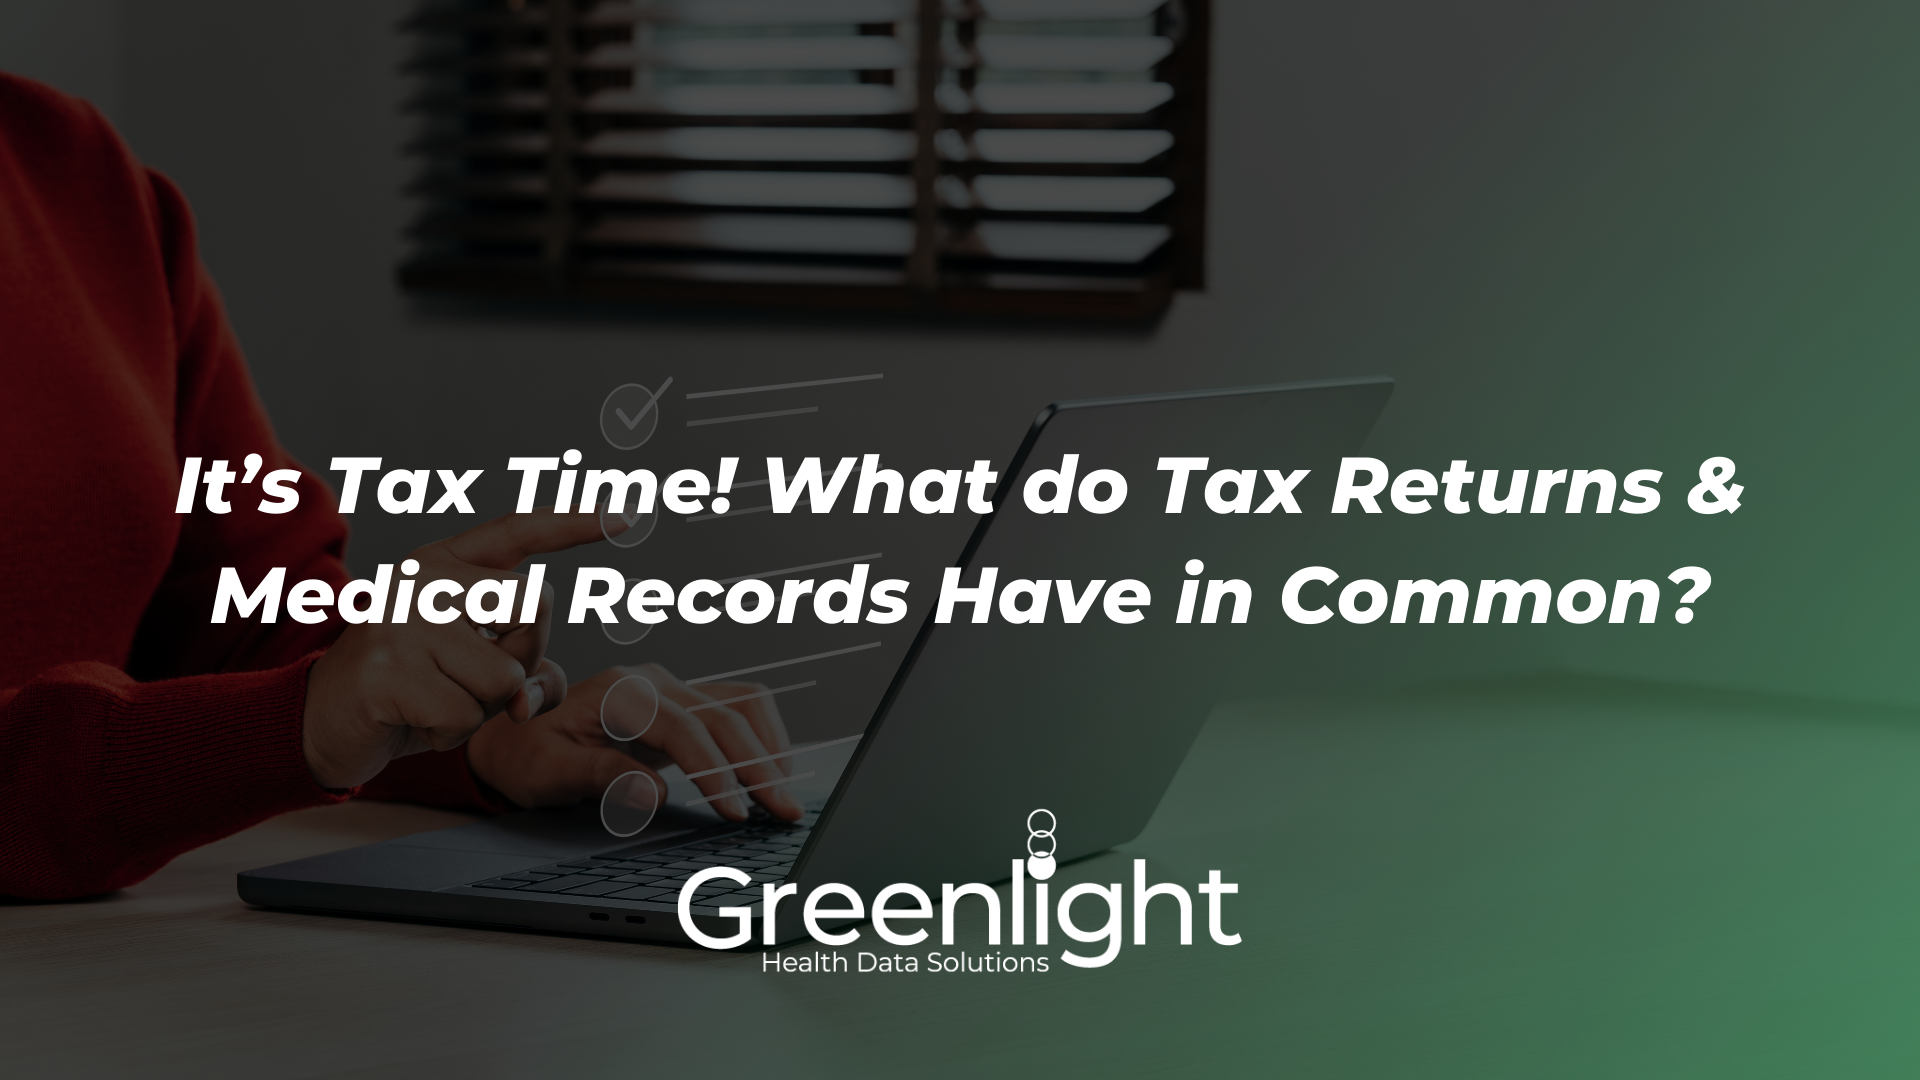 It’s Tax Time! What do Tax Returns & Medical Records Have in Common?